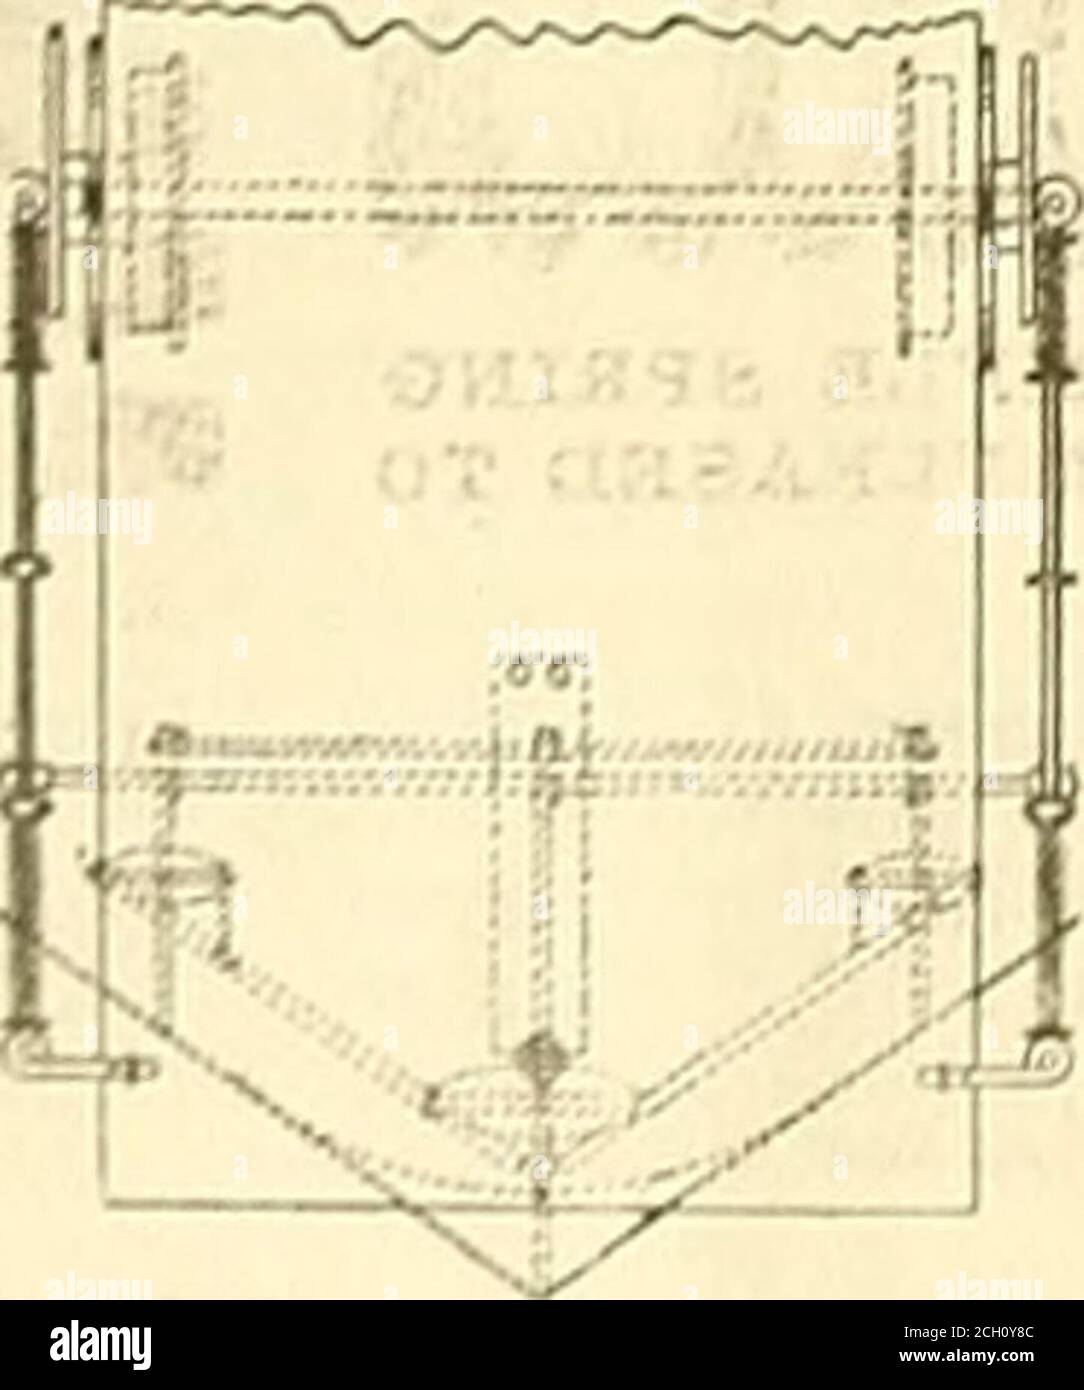 . Electric railway gazette . ith itsouter end of solid material for about ona-third its lengthand the remainder or the other two-thirds of slatsjointed together and to the solid portion. 523.436. Car Rrake System ; Nathaniel Lombard,Boston, Mass. Filed Dec. 11, 1893. An apparatus foropt^rating brakes consisting of a permanently closedsystem, or a system which has no communication withthe atmosphere, and which is adapted Io contain anoperating liquid, said bystem comprising two chambersinto one of which the liquid is to be forced under pres-sure and tbe other of which is to serve normally as av Stock Photo